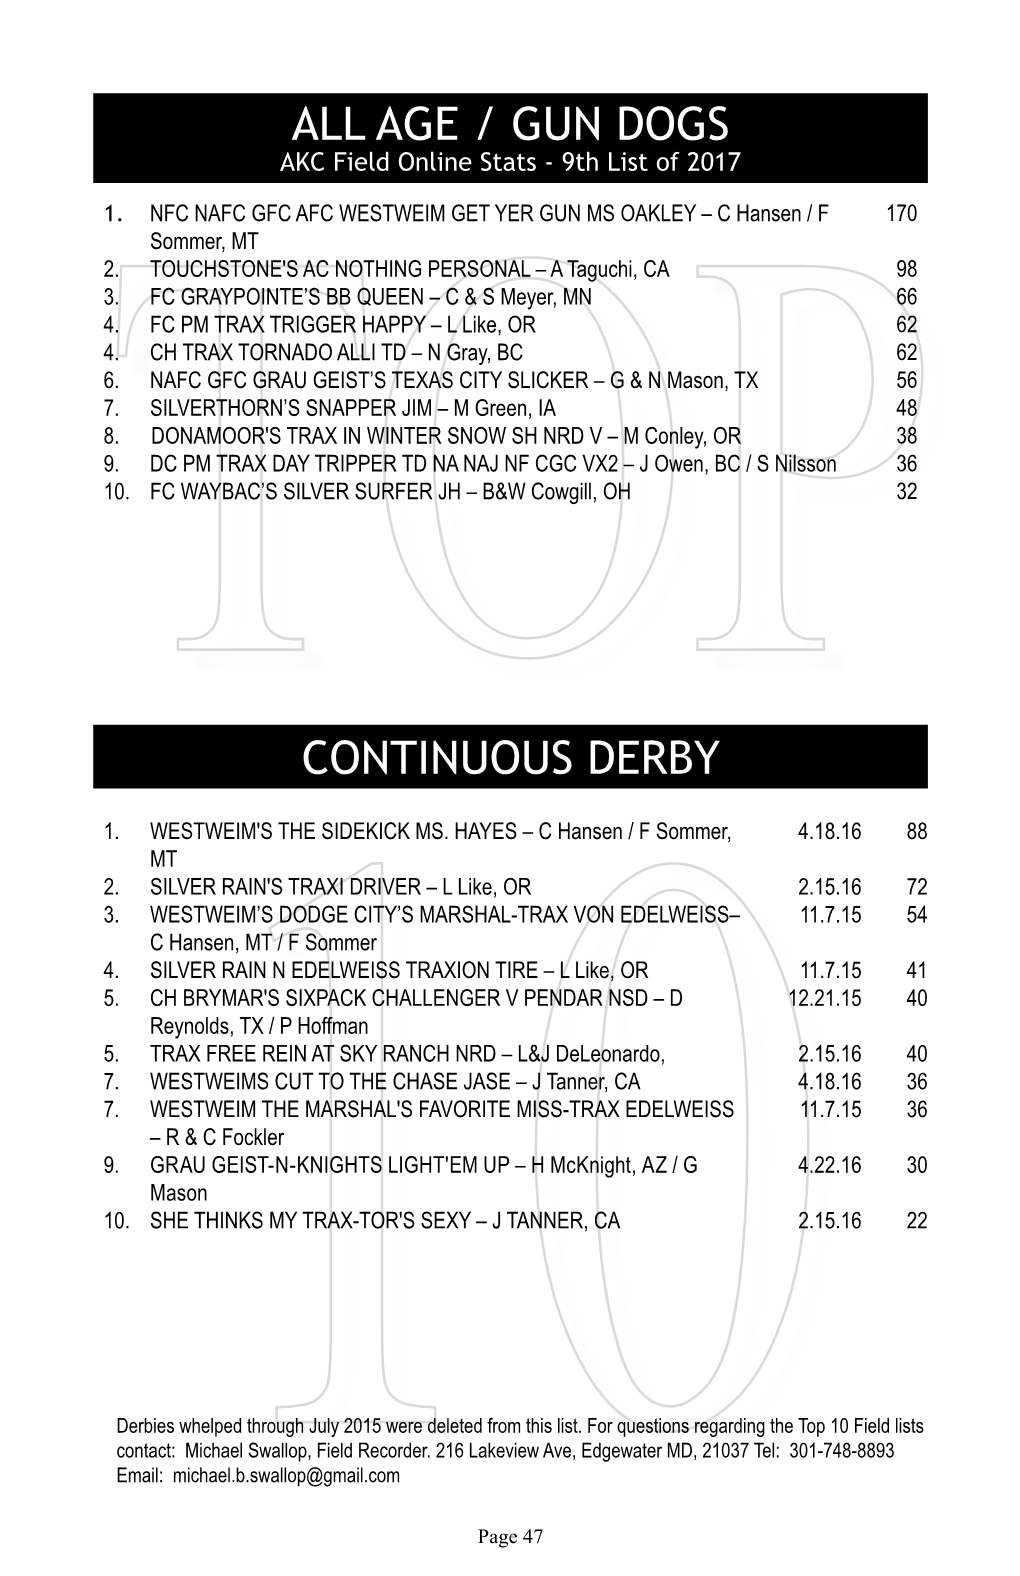 Age / Gun Dogs Continuous Derby